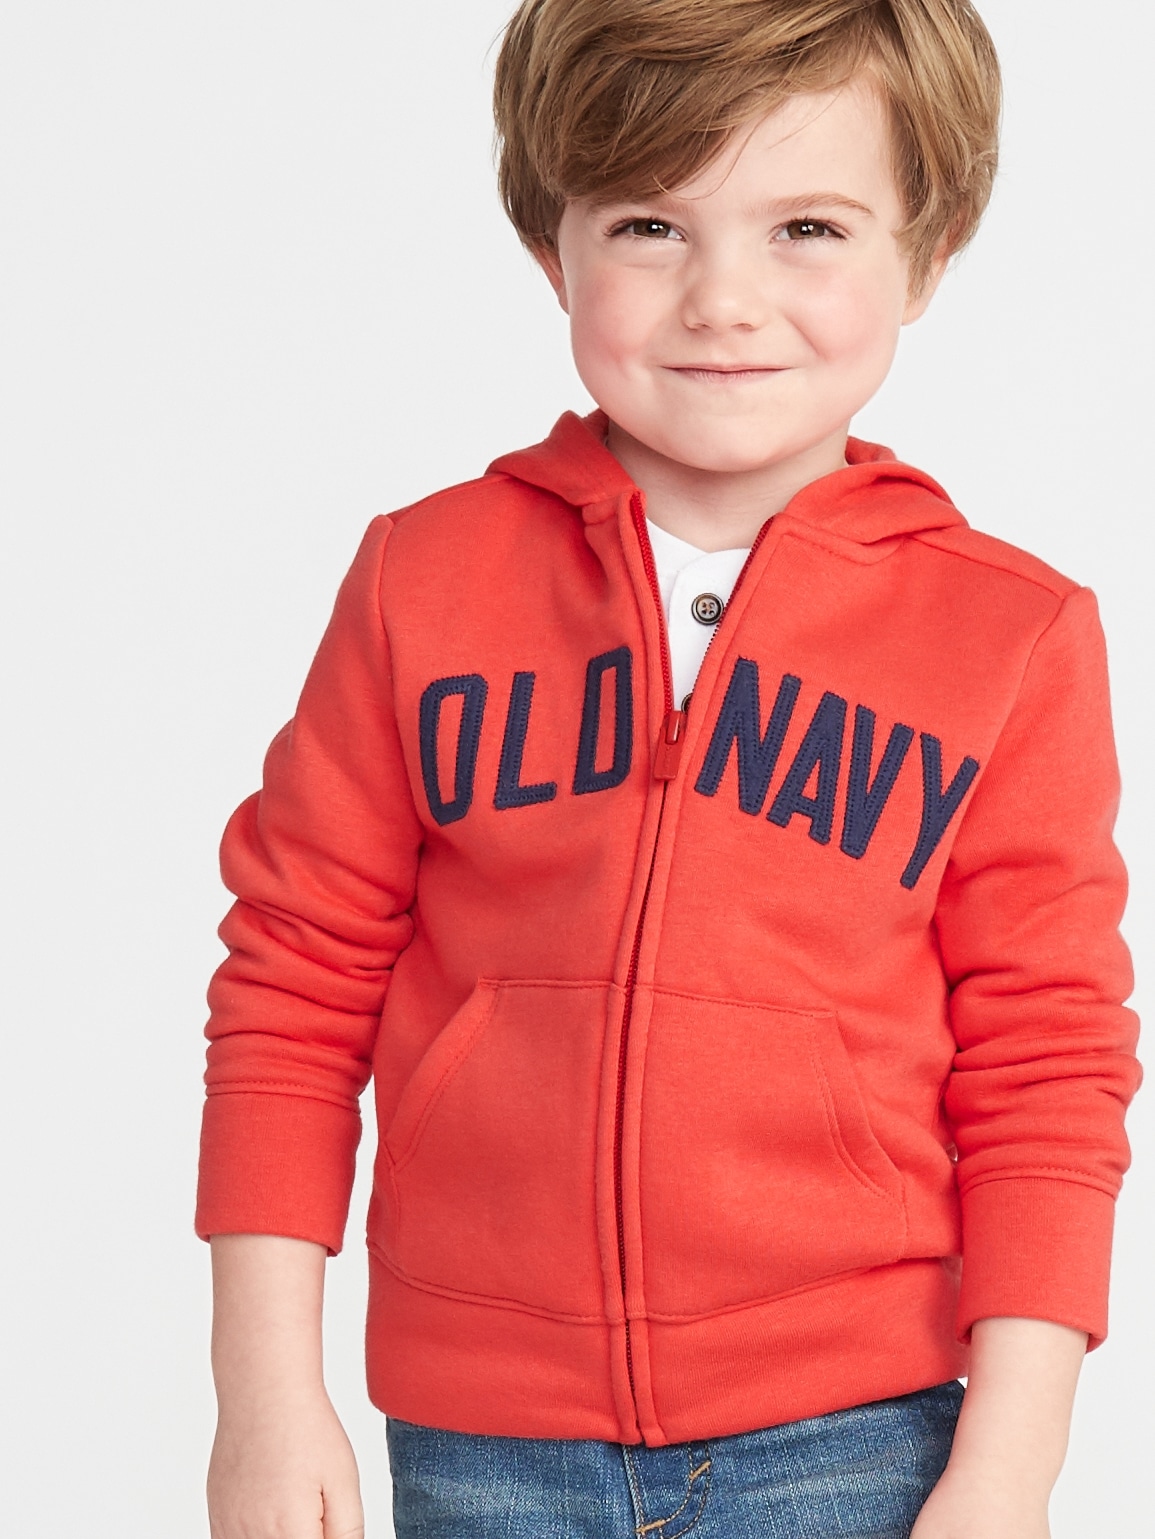 Logo-Graphic Zip Hoodie for Toddler Boys | Old Navy